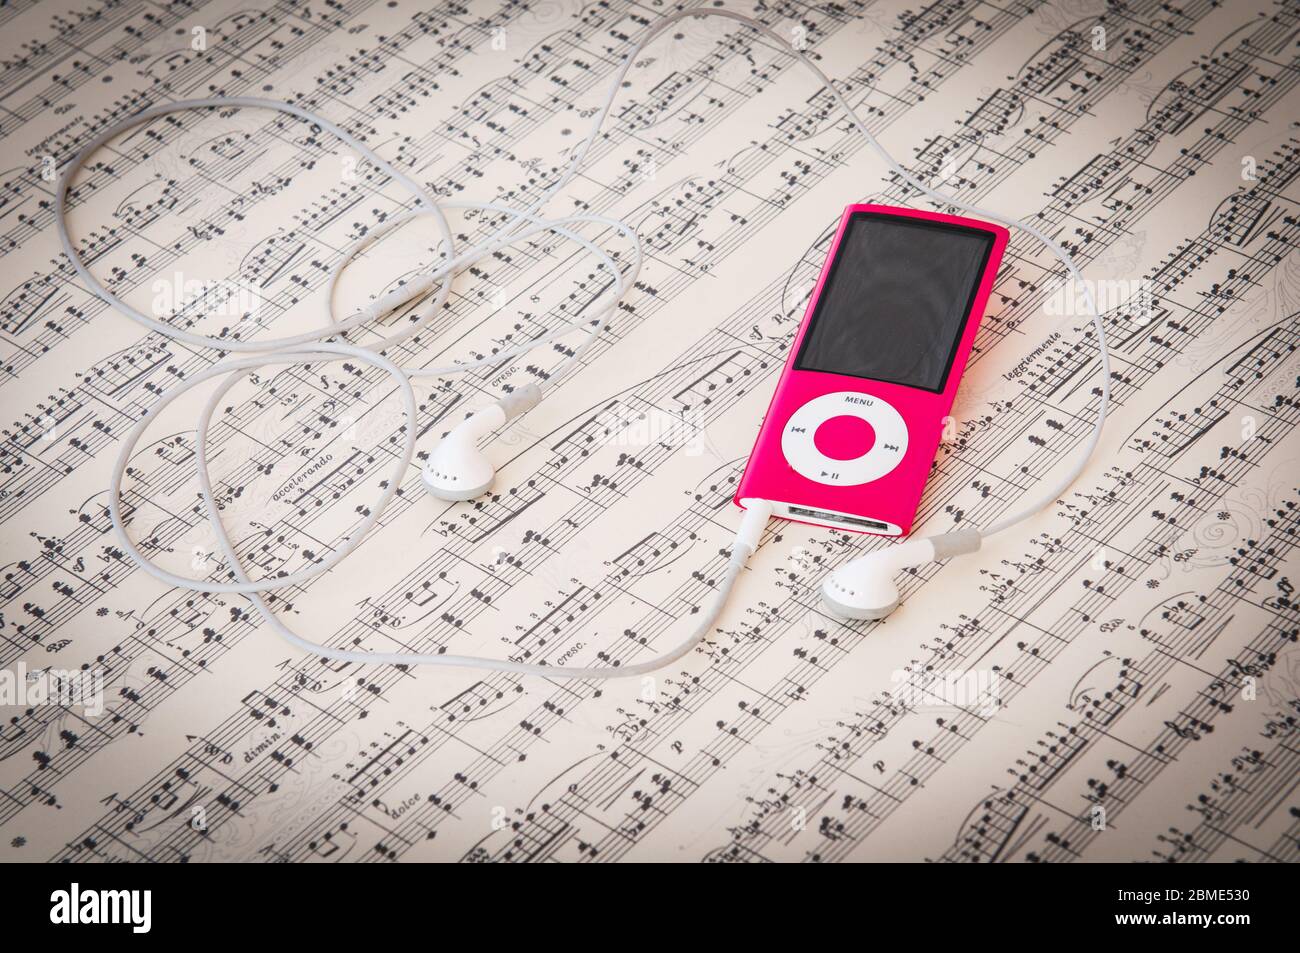 Red Mp3 music player and earphones on a music sheet background with song  notes Stock Photo - Alamy